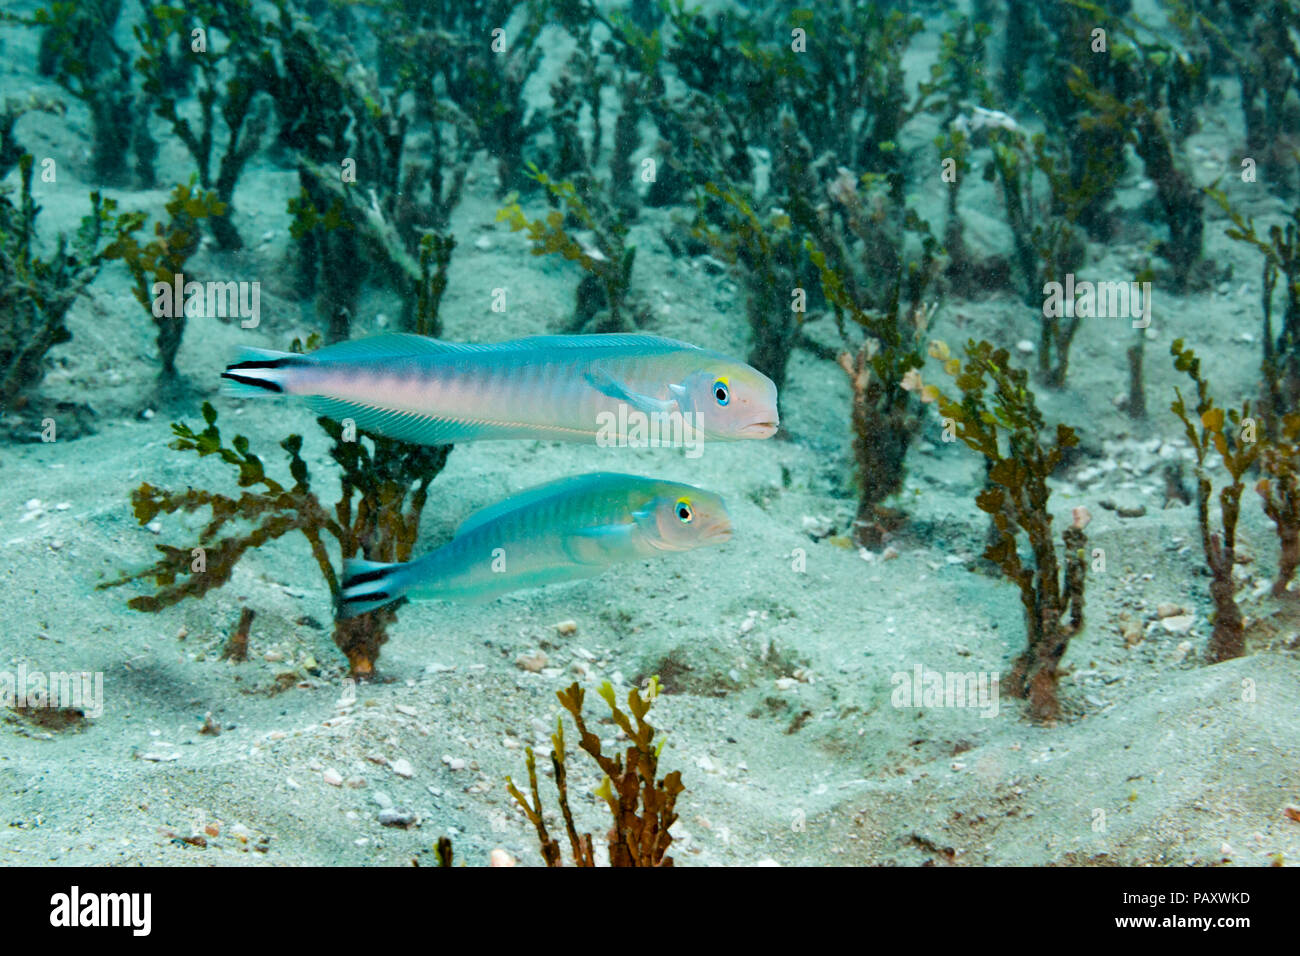 The flagtail tilefish, Malacanthus brevirostris, or quakerfish, inhabits barren areas of outer reef slopes. They occur in pairs over rocks or sandy ar Stock Photo